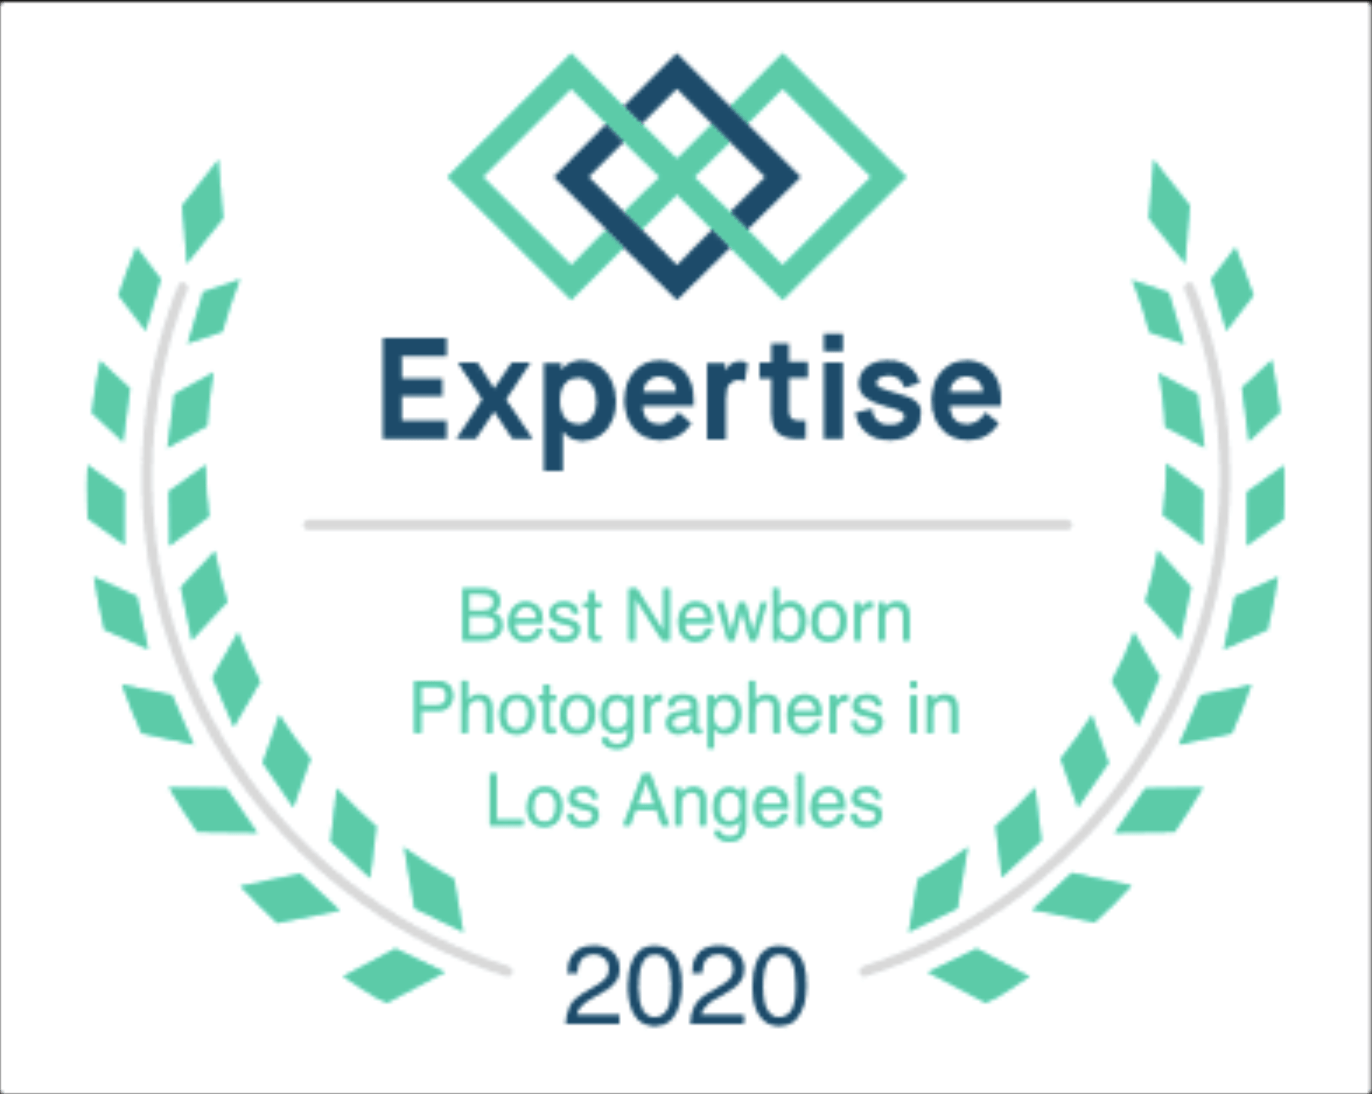 named best newborn photographer in Los Angeles for 2020 - Alexandra Kayy Photography